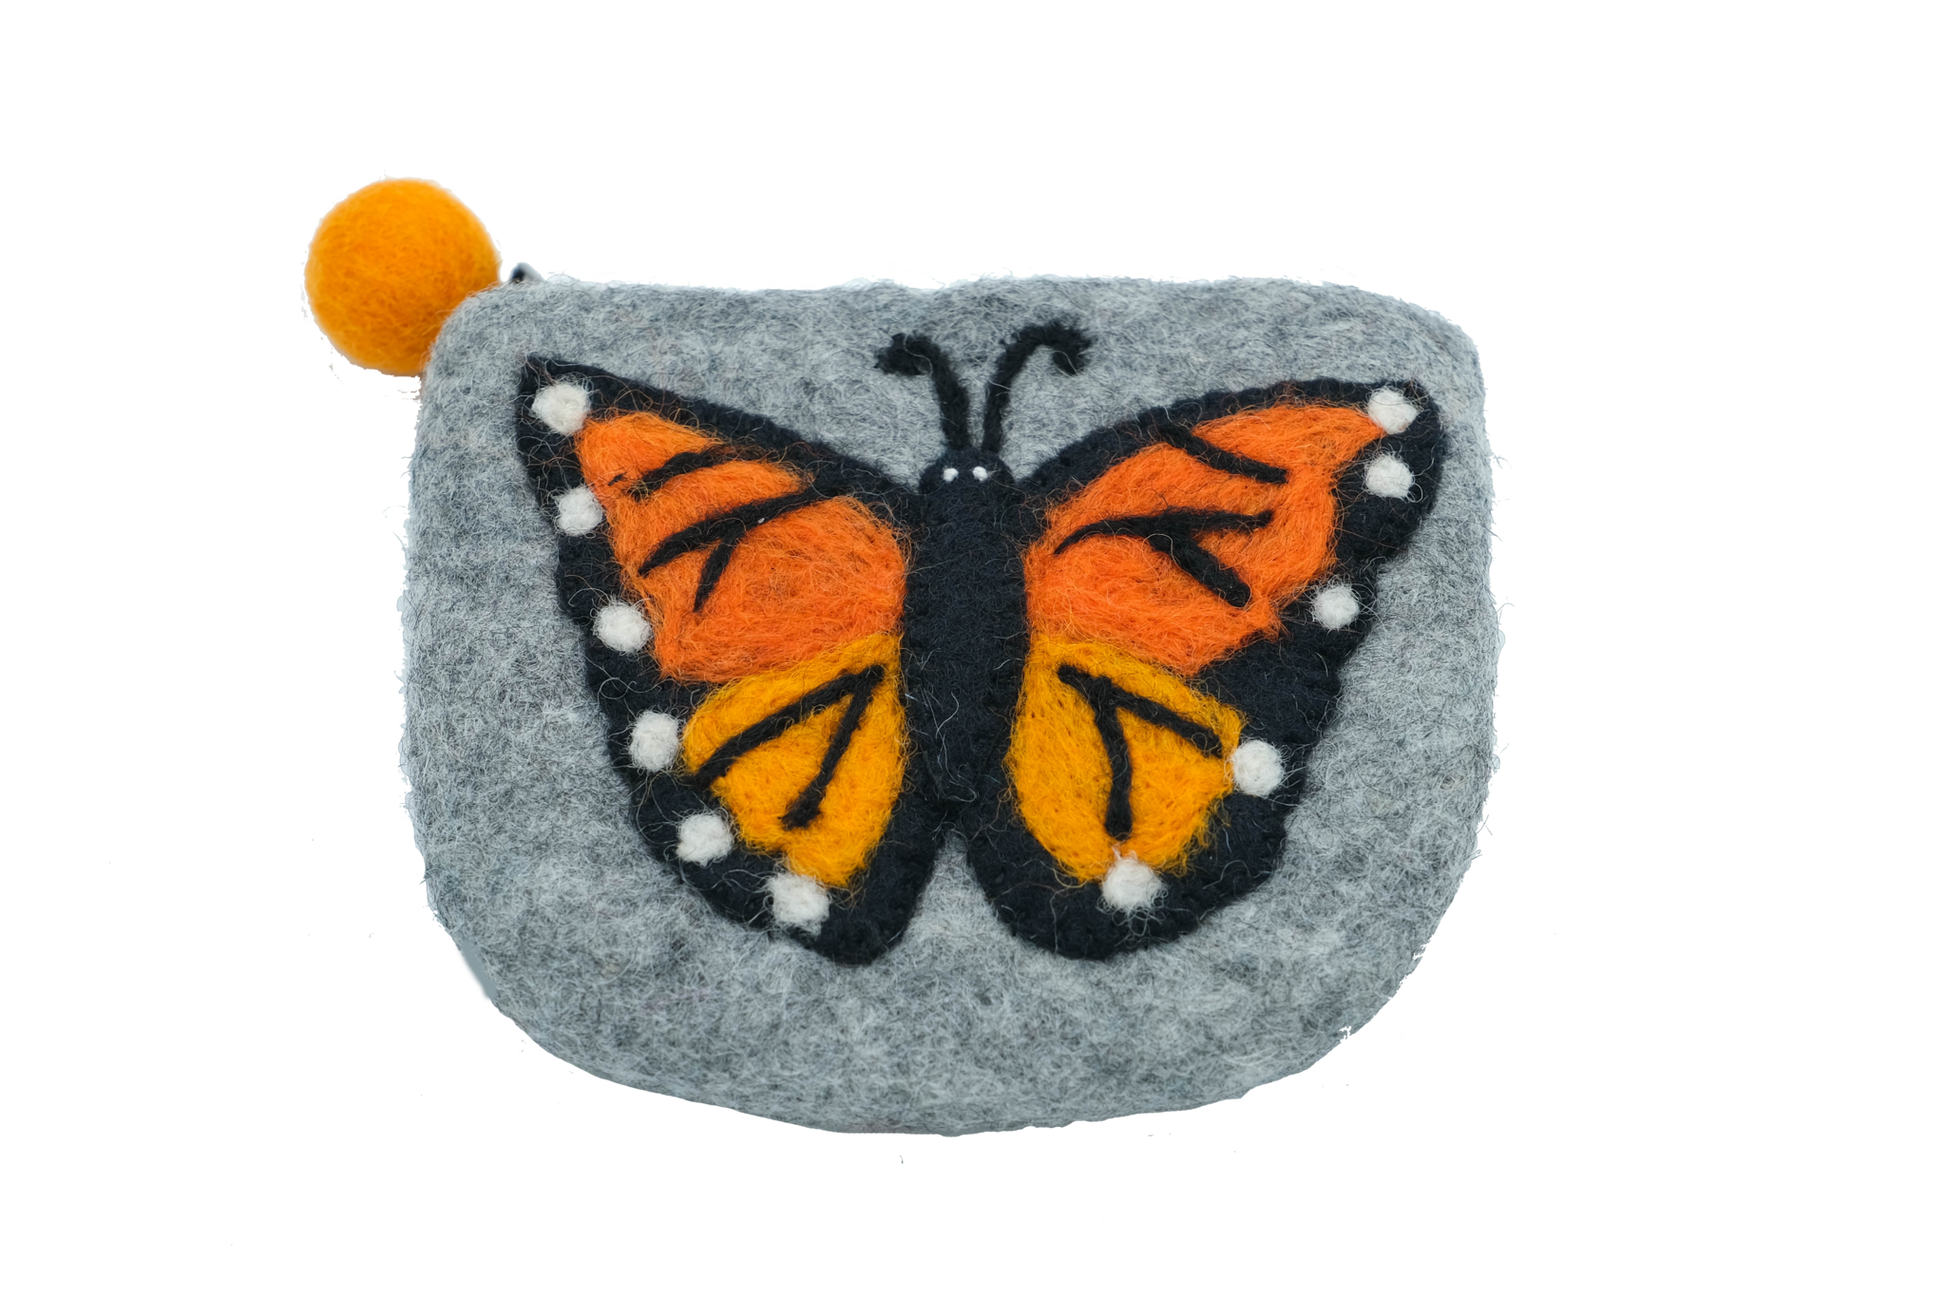 This Global Groove Life, handmade, ethical, fair trade, eco-friendly, sustainable, grey felt zipper coin pouch was created by artisans in Kathmandu Nepal and is adorned with an orange monarch butterfly motif.